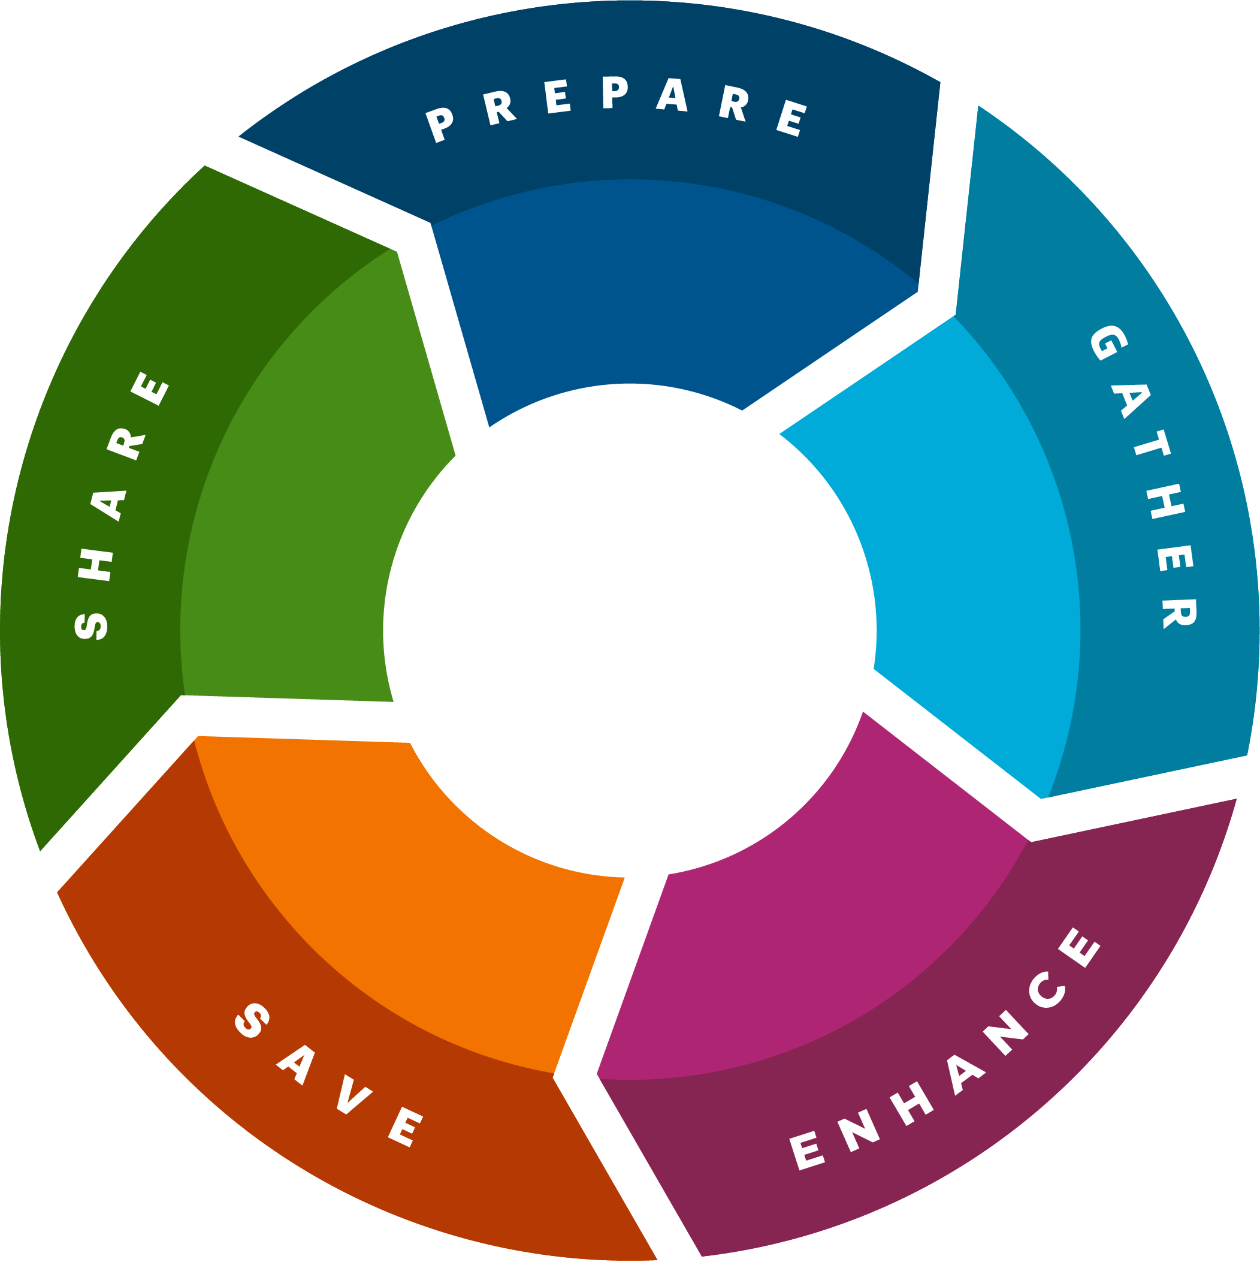 A donut-shaped graphic withinformation about the stages of the digital stewardship lifecycle. The center of the graphic features an illustration of a hand with leaves floating over it. Surrounding this illustration is a ring split into five pieces, each representing one of the digital stewardship lifecycle stages: Prepare, Gather, Enhance, Save, and Share. 